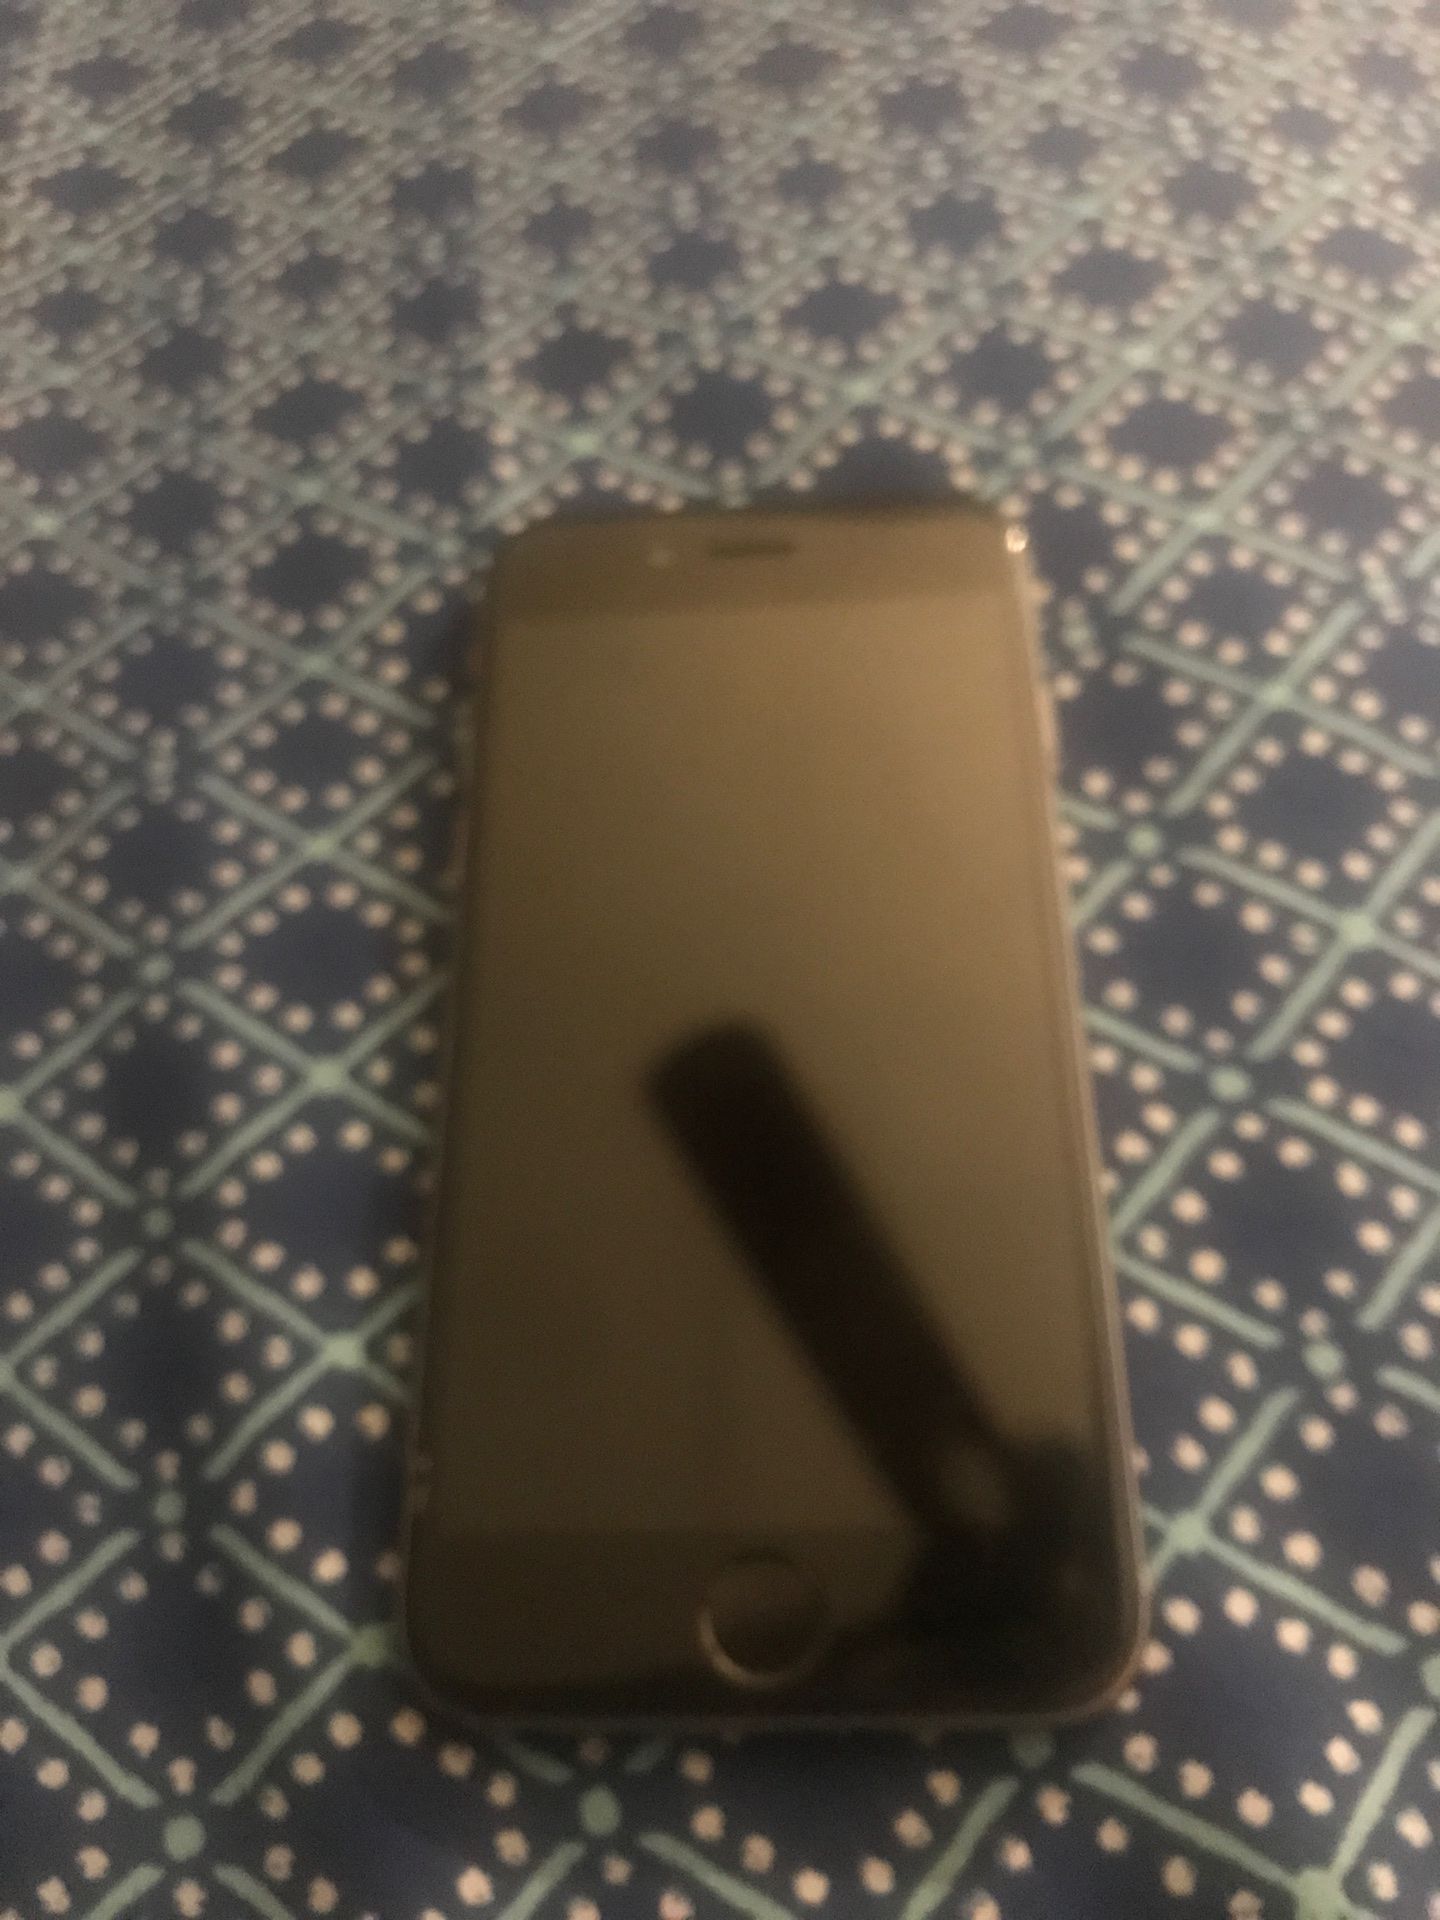 Unlocked iPhone 6 with brand new battery asking 150 obo